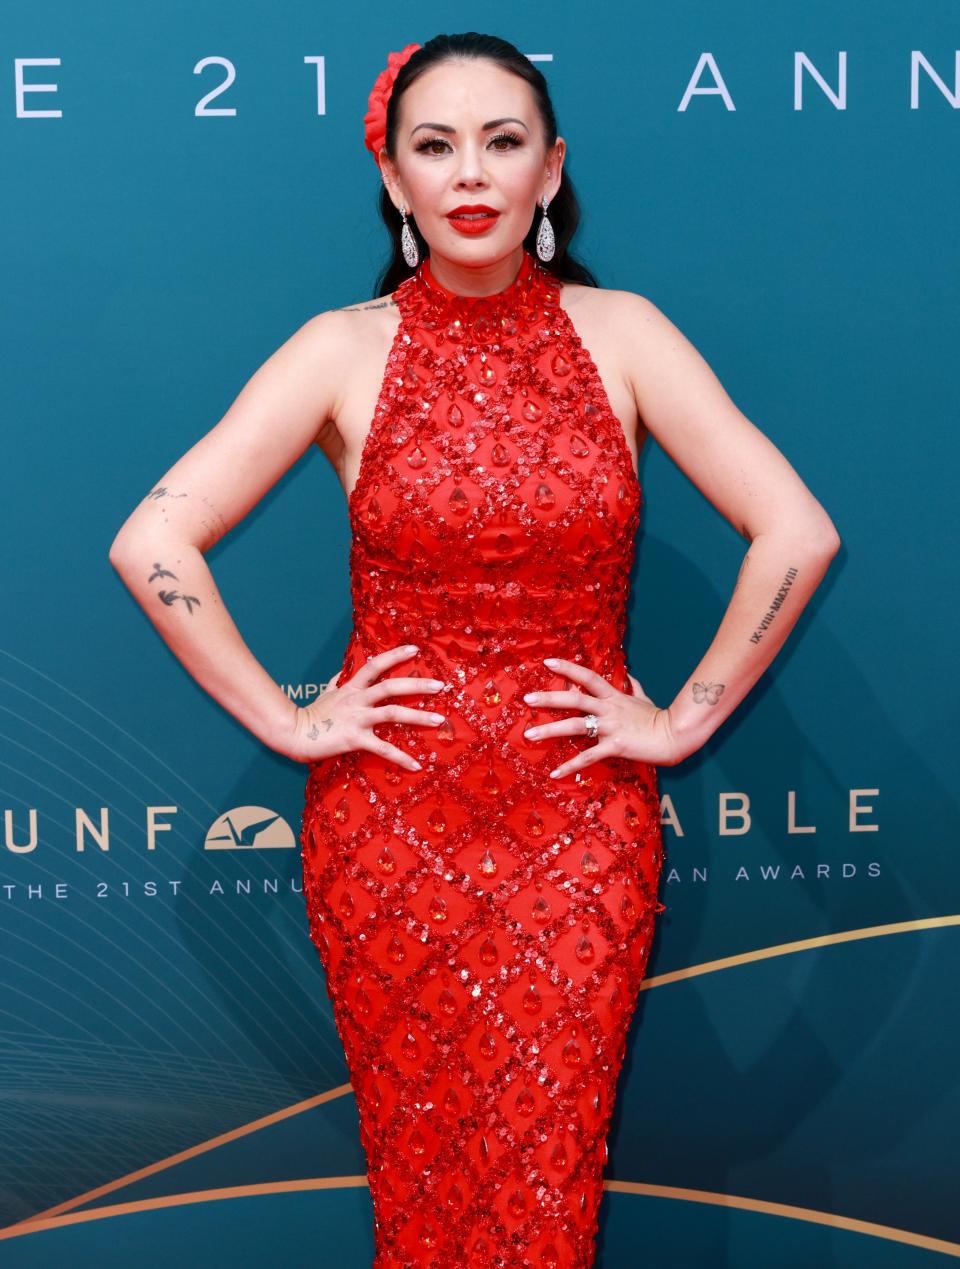 Janel Parrish in an embellished red gown with hands on hips, standing against event backdrop